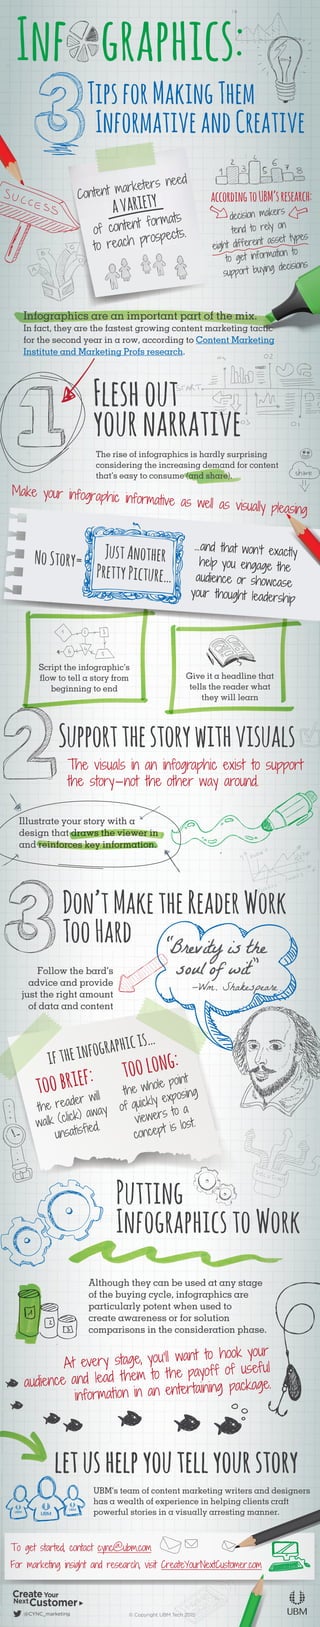 Make your infographic informative as well as visually pleasing
Give it a headline that
tells the reader what
they will learn
Script the infographic’s
ﬂow to tell a story from
beginning to end
TipsforMakingThem
InformativeandCreative
Inf graphics:
—Wm. Shakespeare
accordingtoUBM’sresearch:
decision makers
tend to rely on
eight different asset types
to get information to
support buying decisions
Content marketers need
avariety
of content formats
to reach prospects.
Infographics are an important part of the mix.
In fact, they are the fastest growing content marketing tactic
for the second year in a row, according to Content Marketing
Institute and Marketing Profs research.
NoStory=
The rise of infographics is hardly surprising
considering the increasing demand for content
that’s easy to consume (and share).
JustAnother
PrettyPicture…
…and that won’t exactly
help you engage the
audience or showcase
your thought leadership
Supportthestorywithvisuals
Don’tMaketheReaderWork
TooHard
Fleshout
yournarrative
Illustrate your story with a
design that draws the viewer in
and reinforces key information.
Follow the bard’s
advice and provide
just the right amount
of data and content
The visuals in an infographic exist to support
the story—not the other way around.
toobrief: toolong:iftheinfographicis…
At every stage, you’ll want to hook your
audience and lead them to the payoff of useful
information in an entertaining package.
the reader will
walk (click) away
unsatisfied.
Putting
InfographicstoWork
Although they can be used at any stage
of the buying cycle, infographics are
particularly potent when used to
create awareness or for solution
comparisons in the consideration phase.
the whole point
of quickly exposing
viewers to a
concept is lost.
@CYNC_marketing
UBM’s team of content marketing writers and designers
has a wealth of experience in helping clients craft
powerful stories in a visually arresting manner.
letushelpyoutellyourstory
© Copyright UBM Tech 2015
http://www.CreateYourNextCustomer.com
mailto:cync@ubm.comTo get started, contact cync@ubm.com
For marketing insight and research, visit CreateYourNextCustomer.com
 